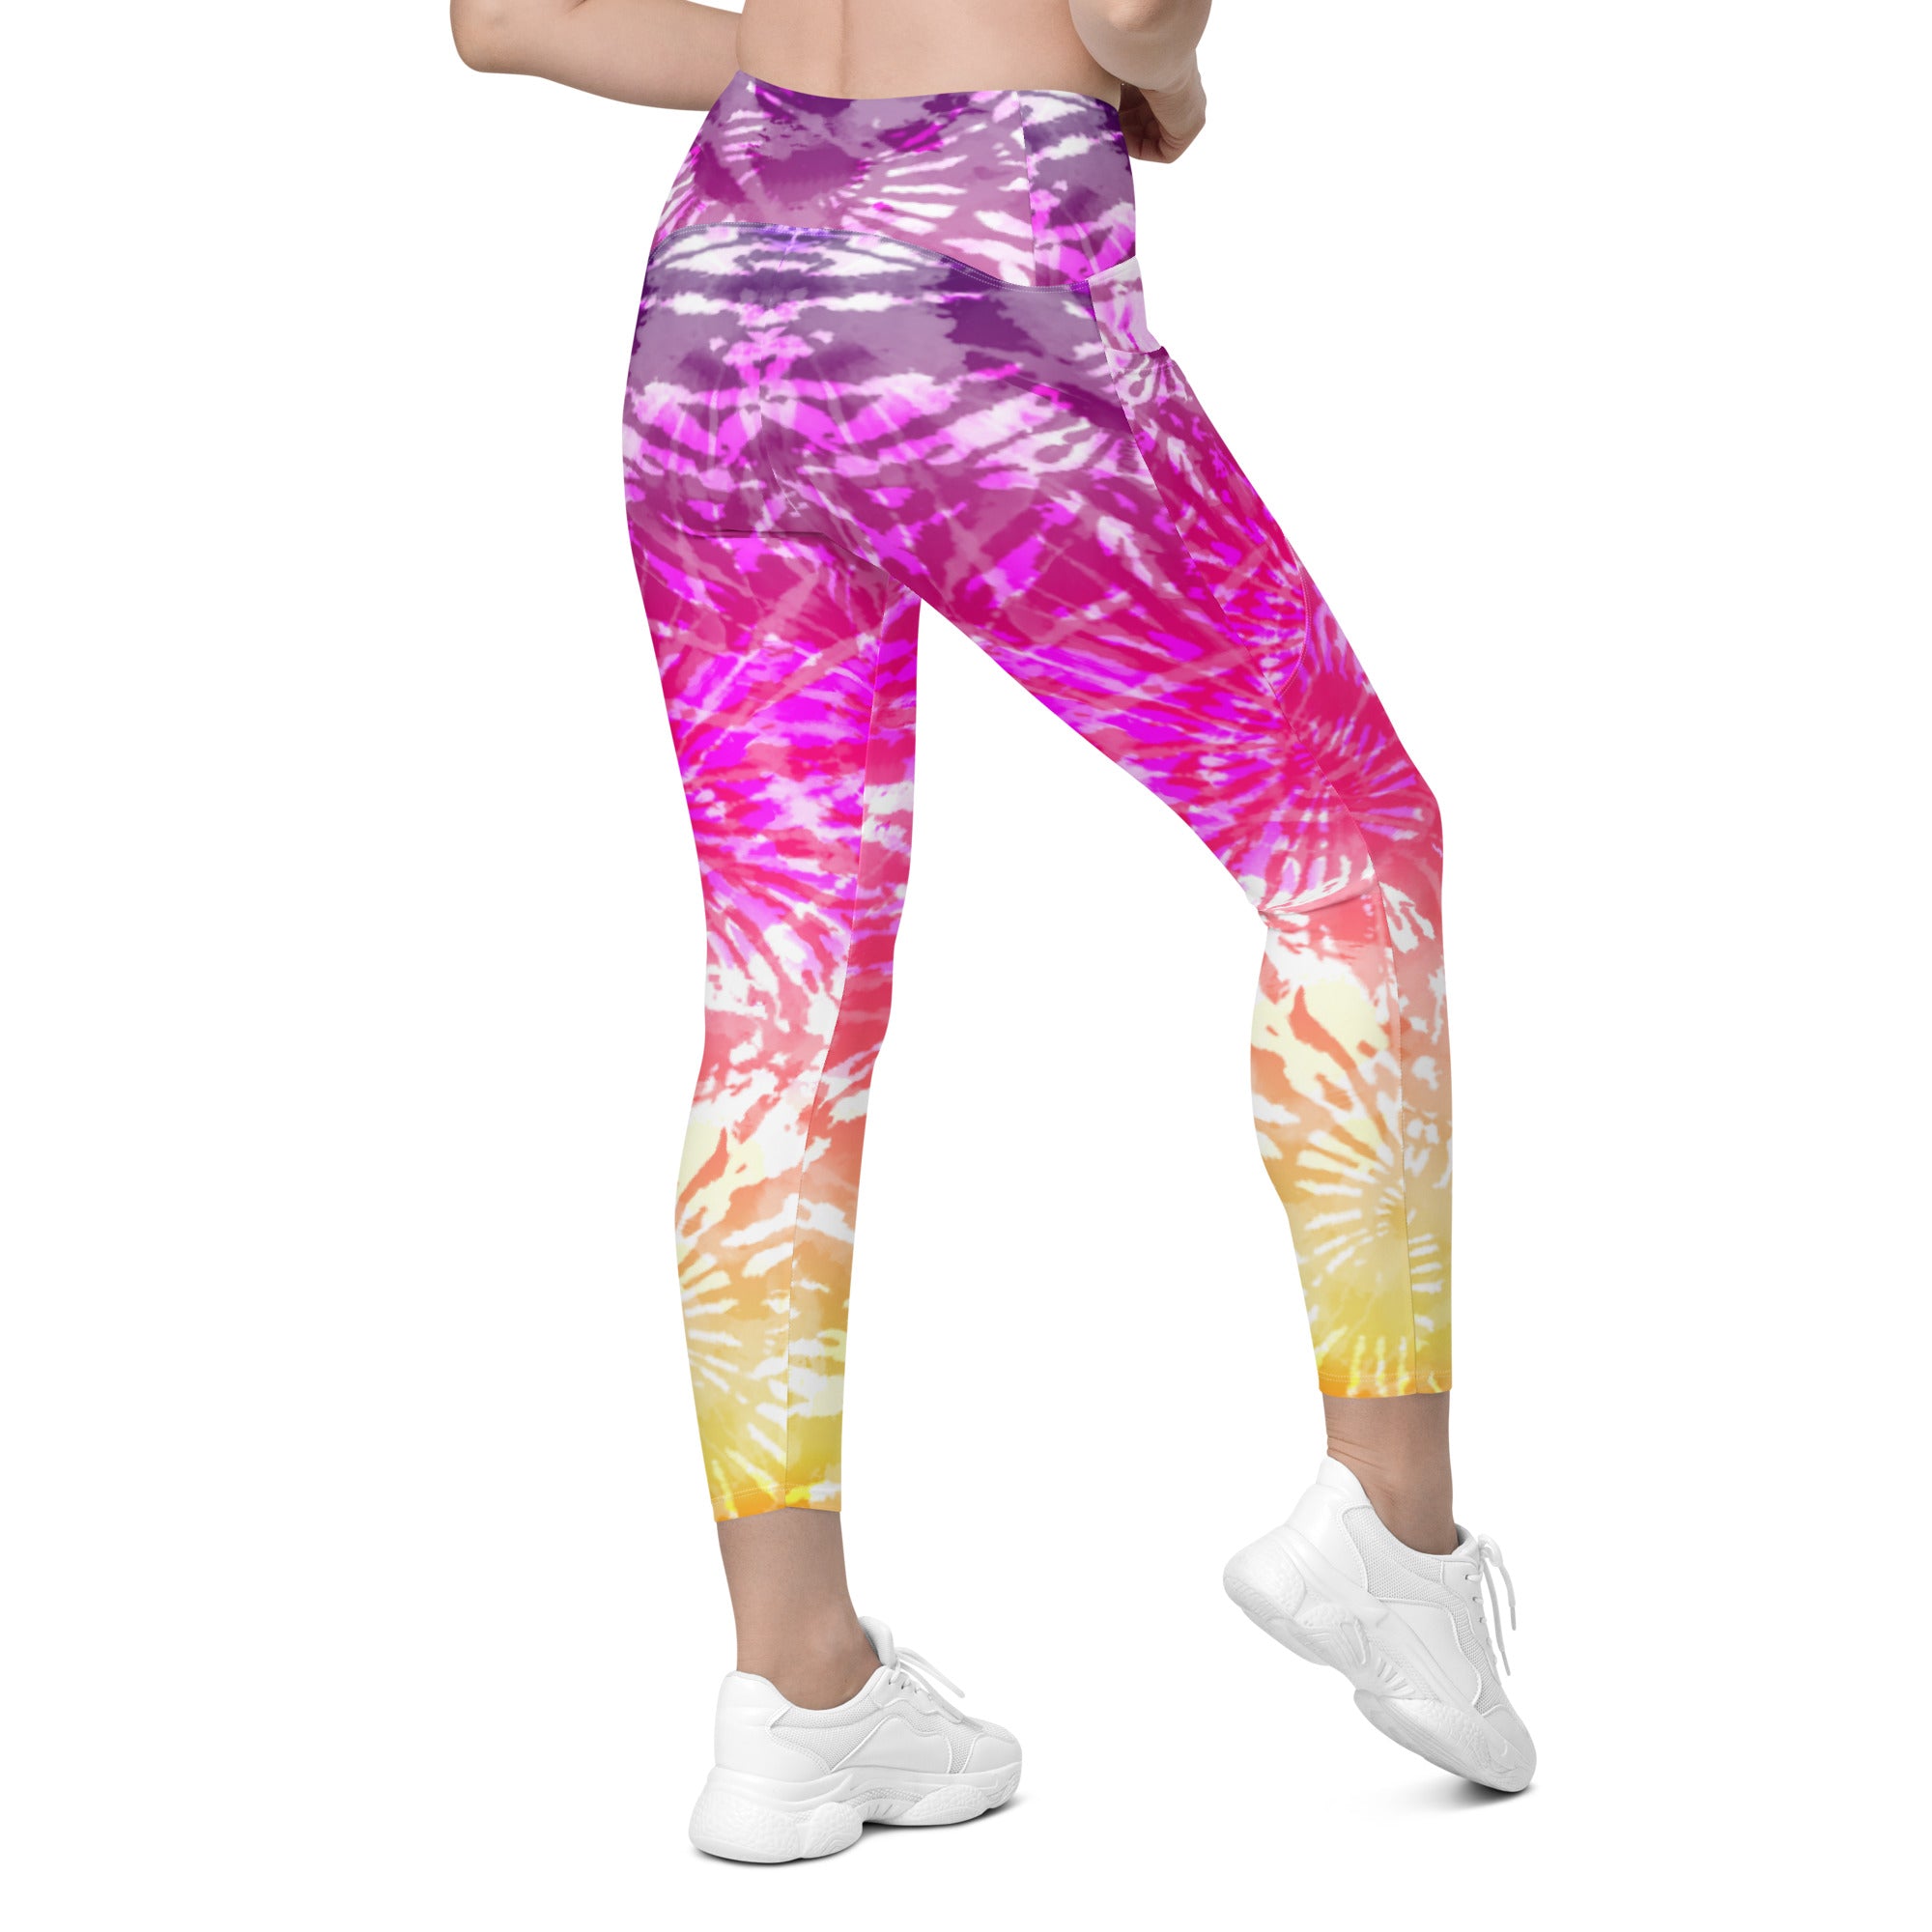 Crossover leggings with pockets- TIE DYE SPIRALS